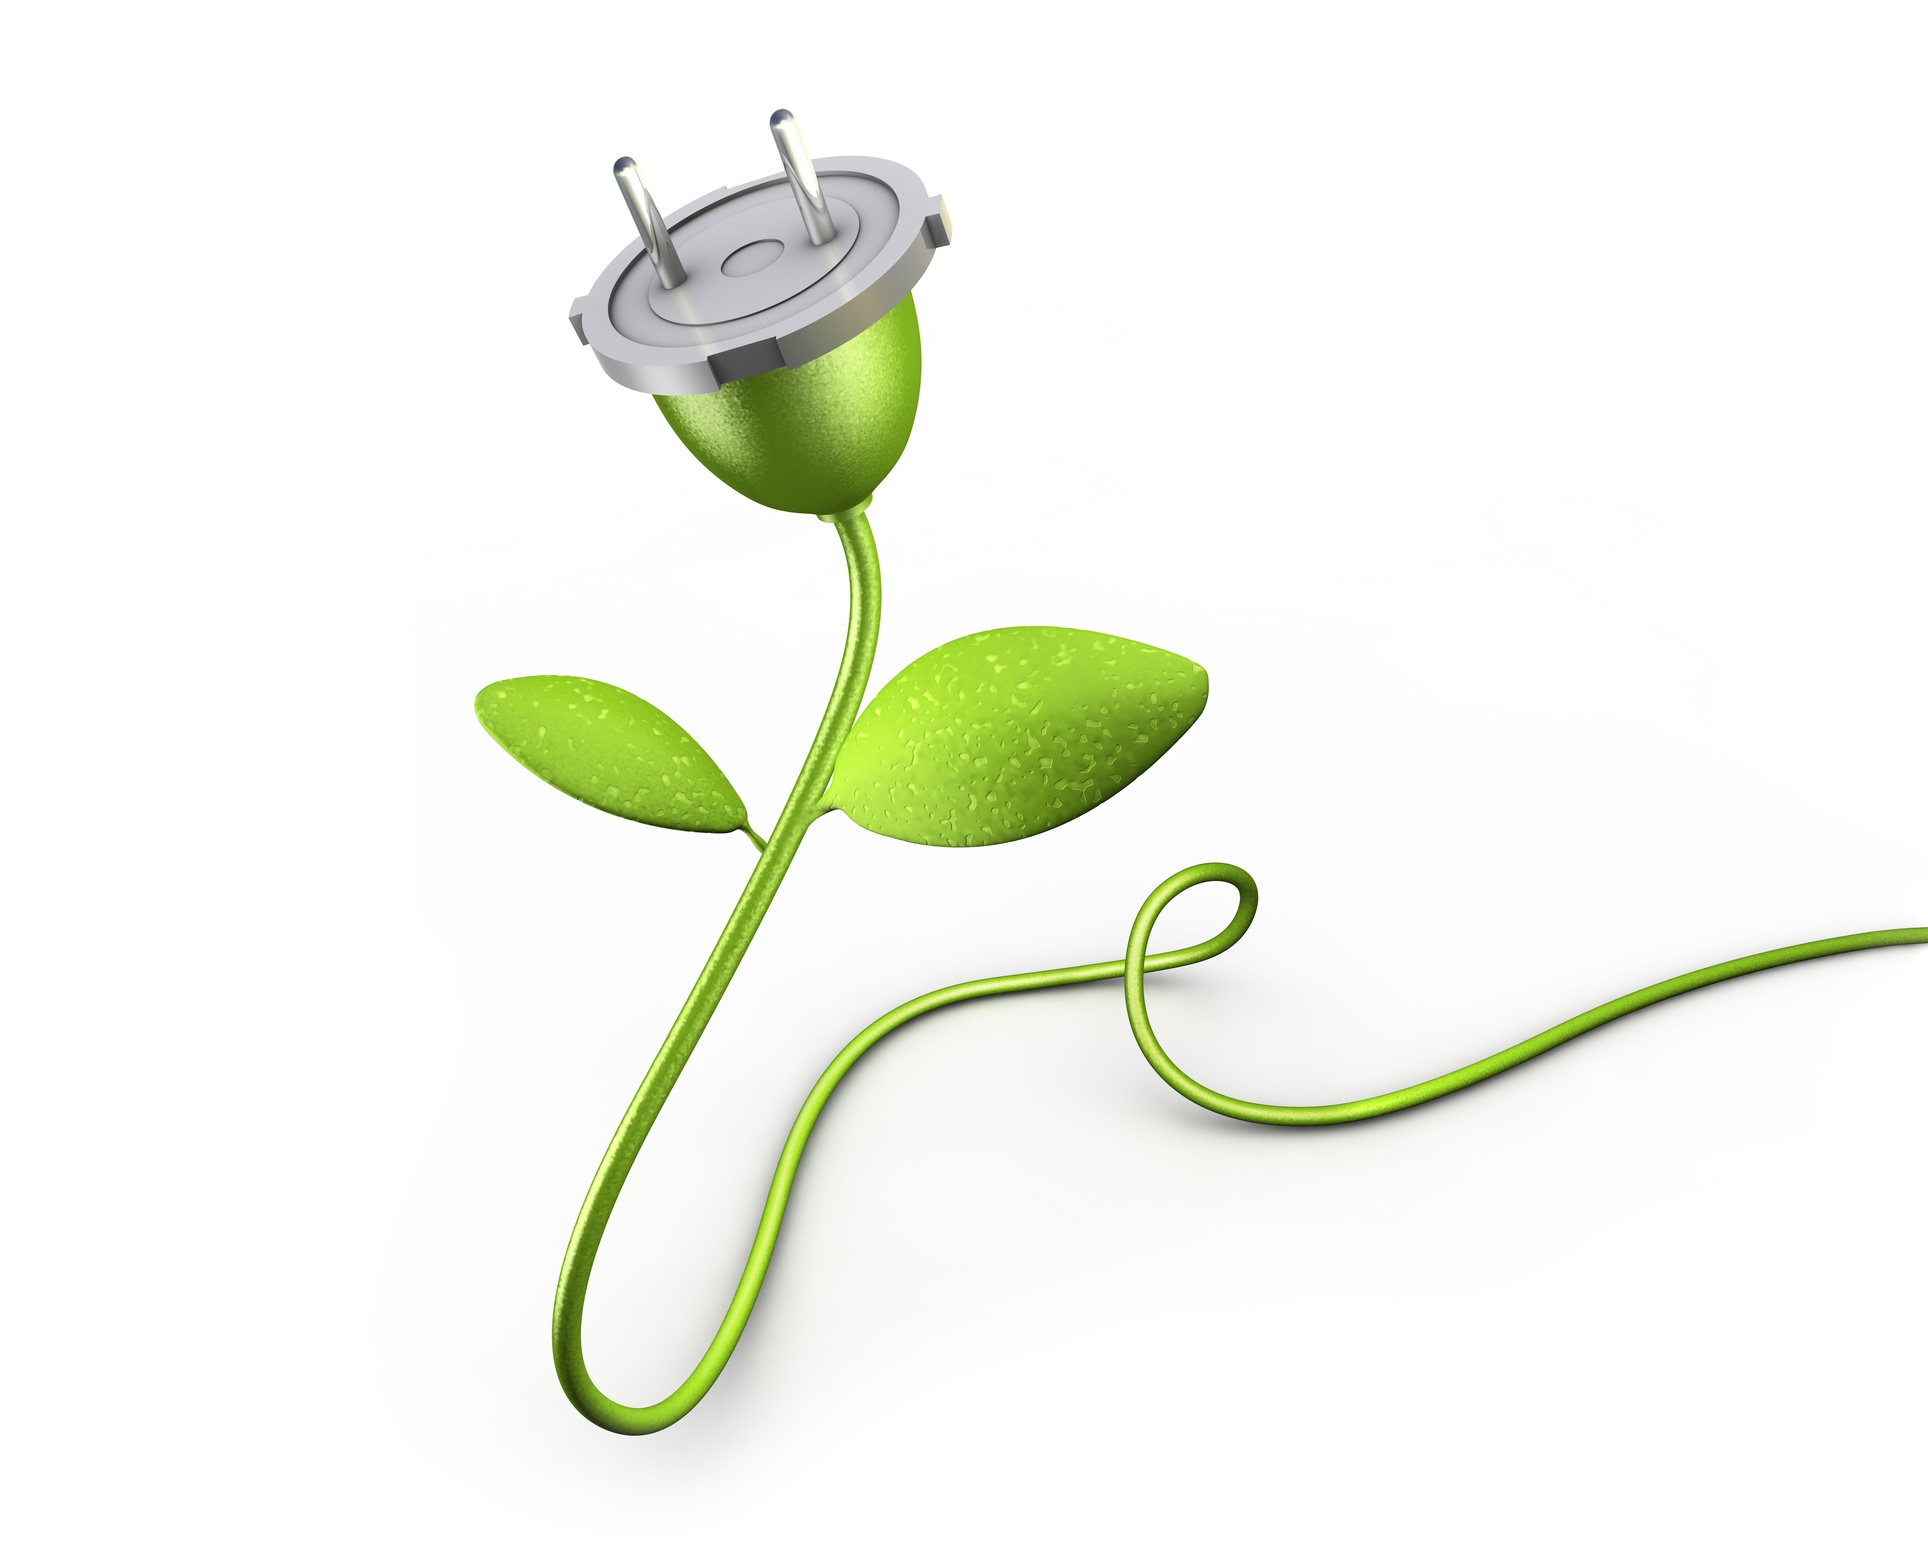 Bio Energy - Comes with clipping path around the plant to get rid of the shadows.